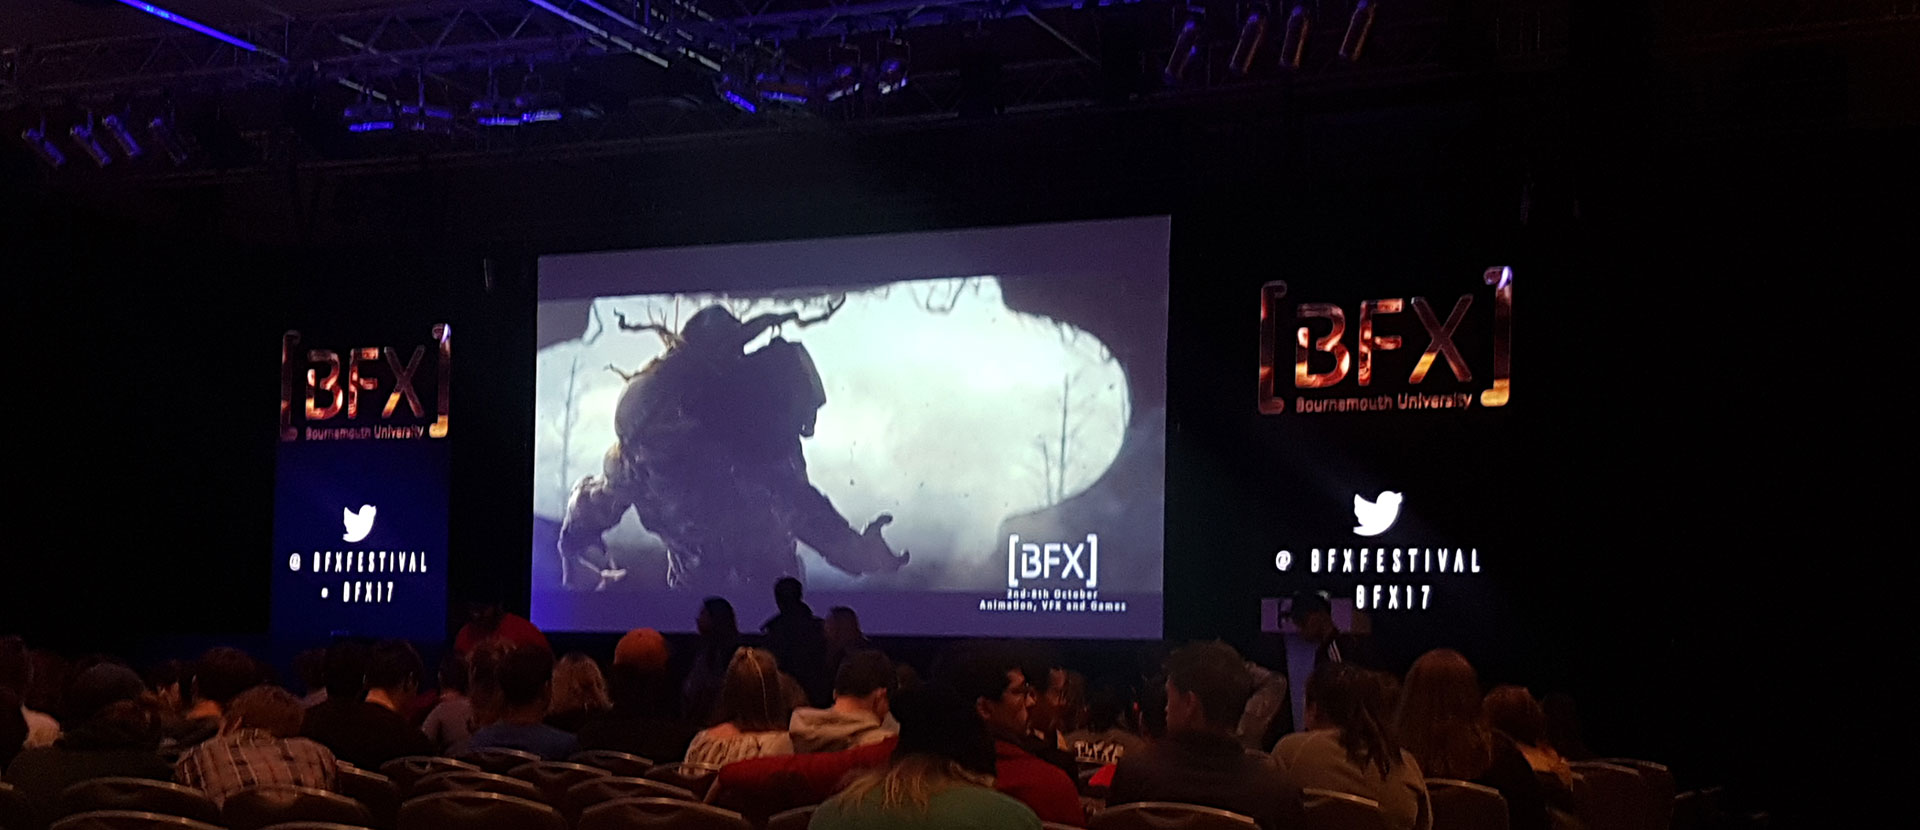 One of the presentations at the BFX Festival